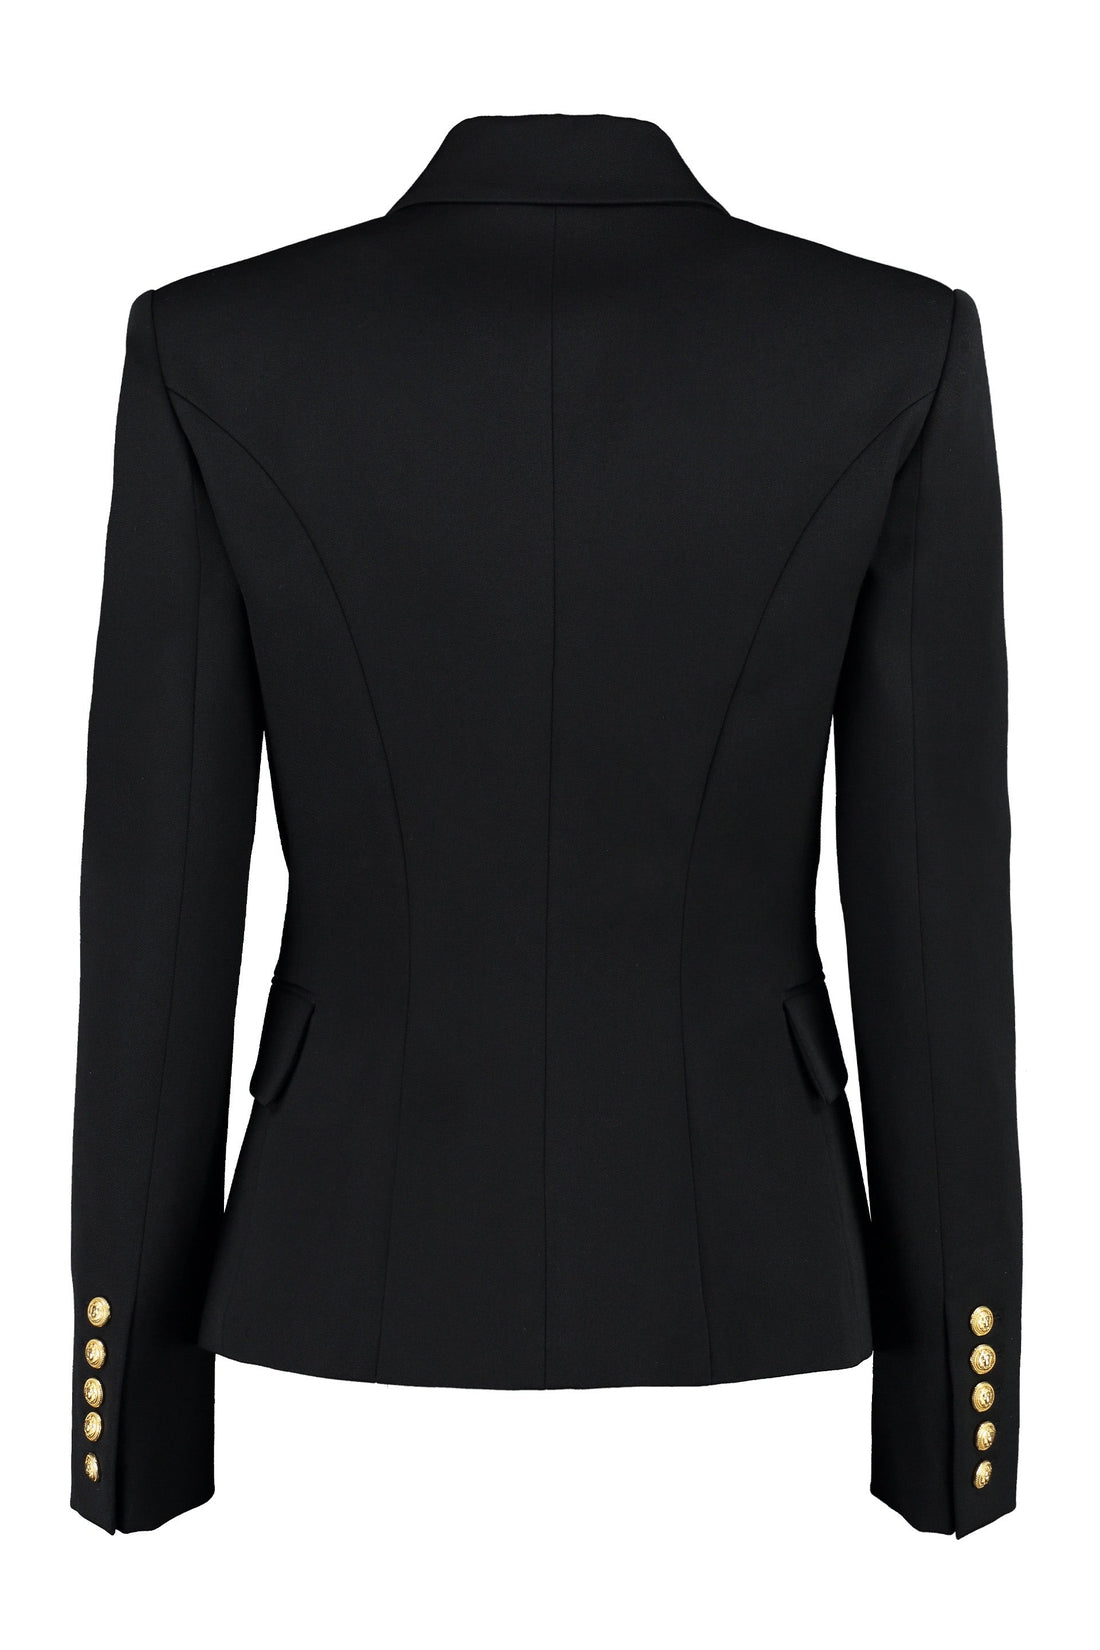 Balmain-OUTLET-SALE-Wool double-breasted blazer-ARCHIVIST